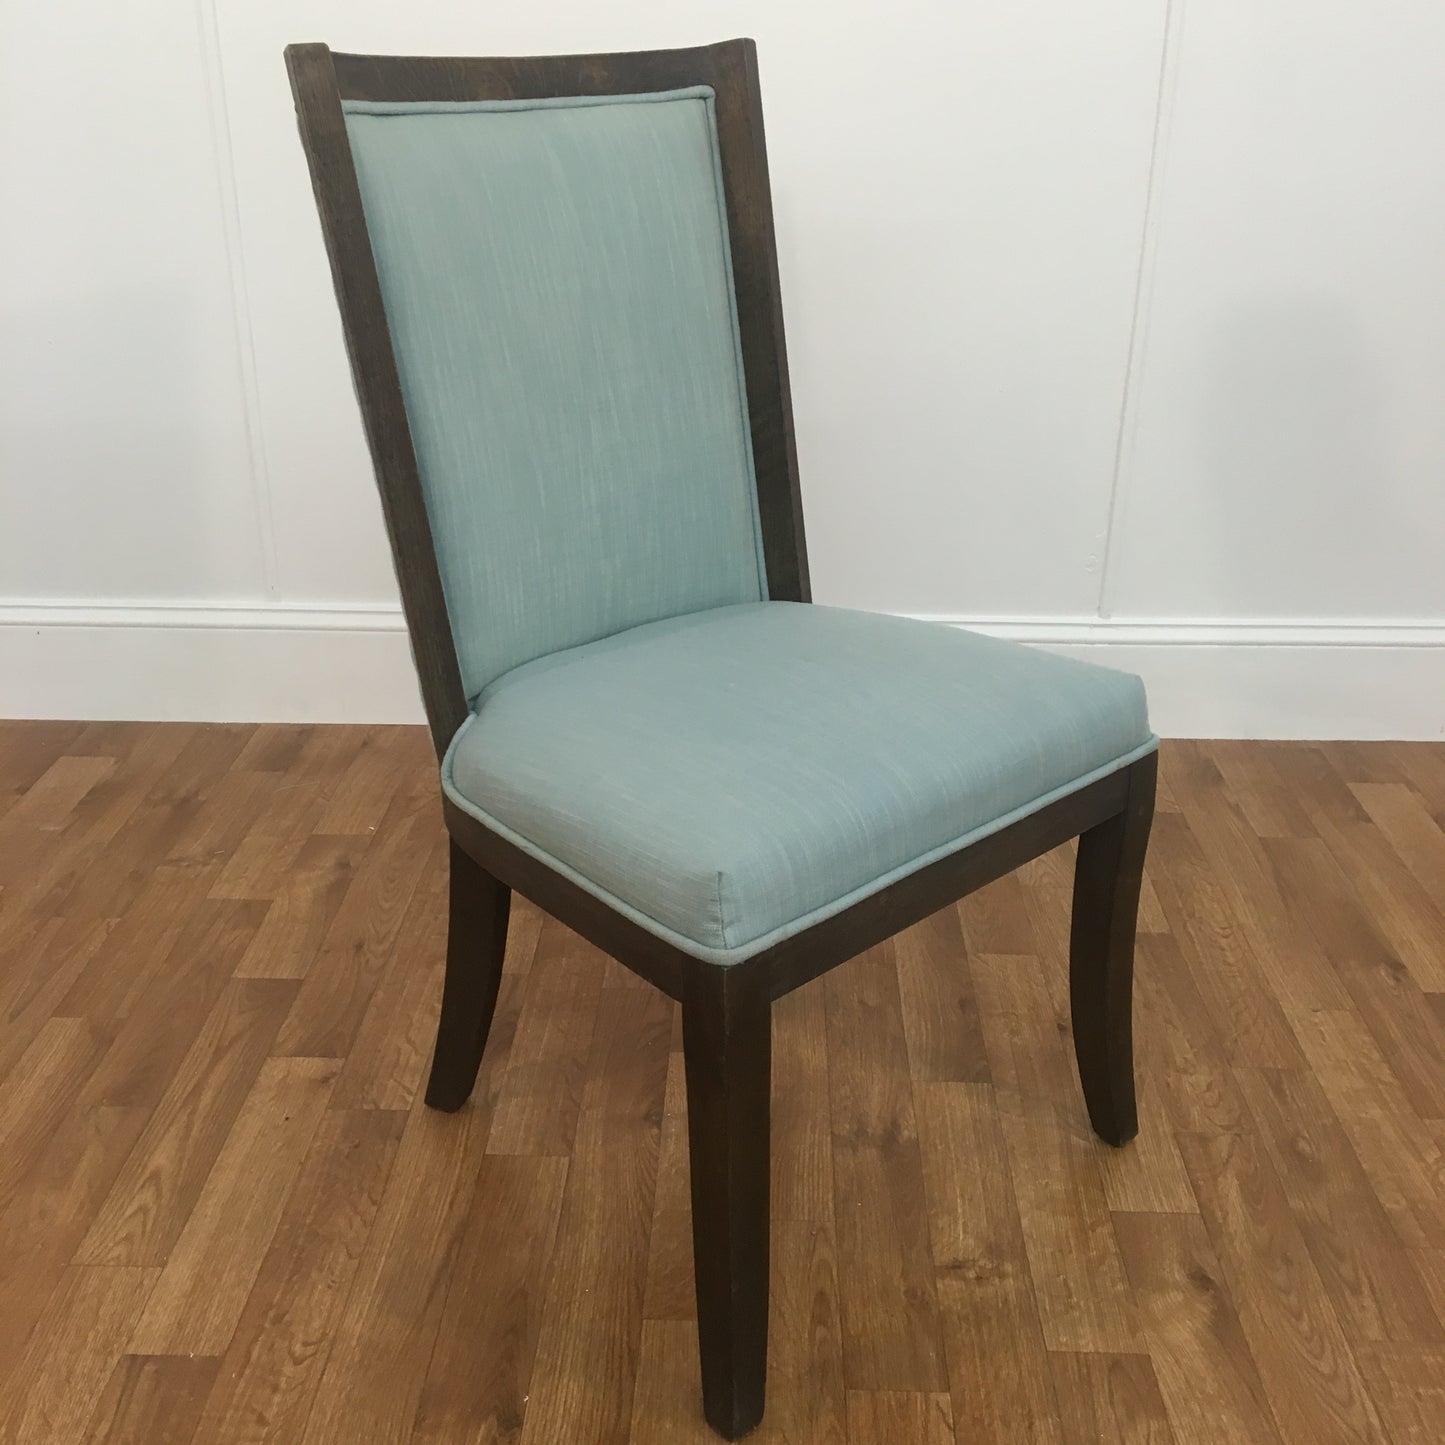 POWDER BLUE DINING CHAIR WITH RIVETS